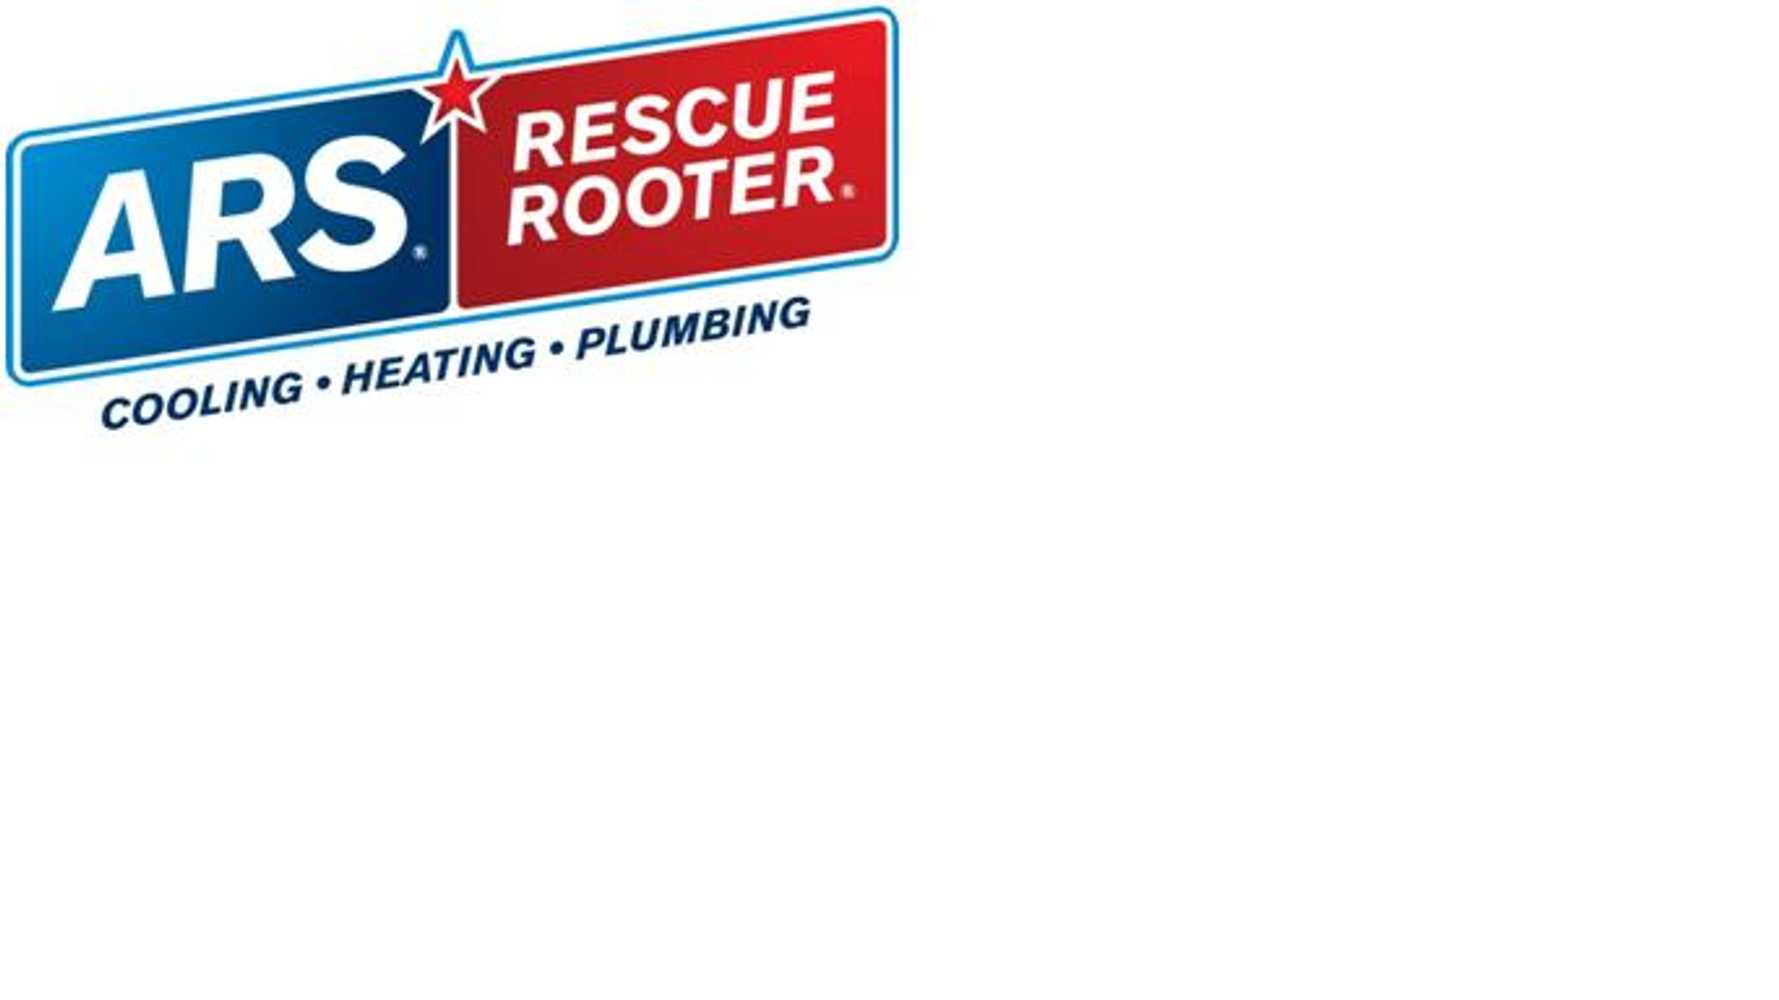 ARS/Rescue Rooter Project